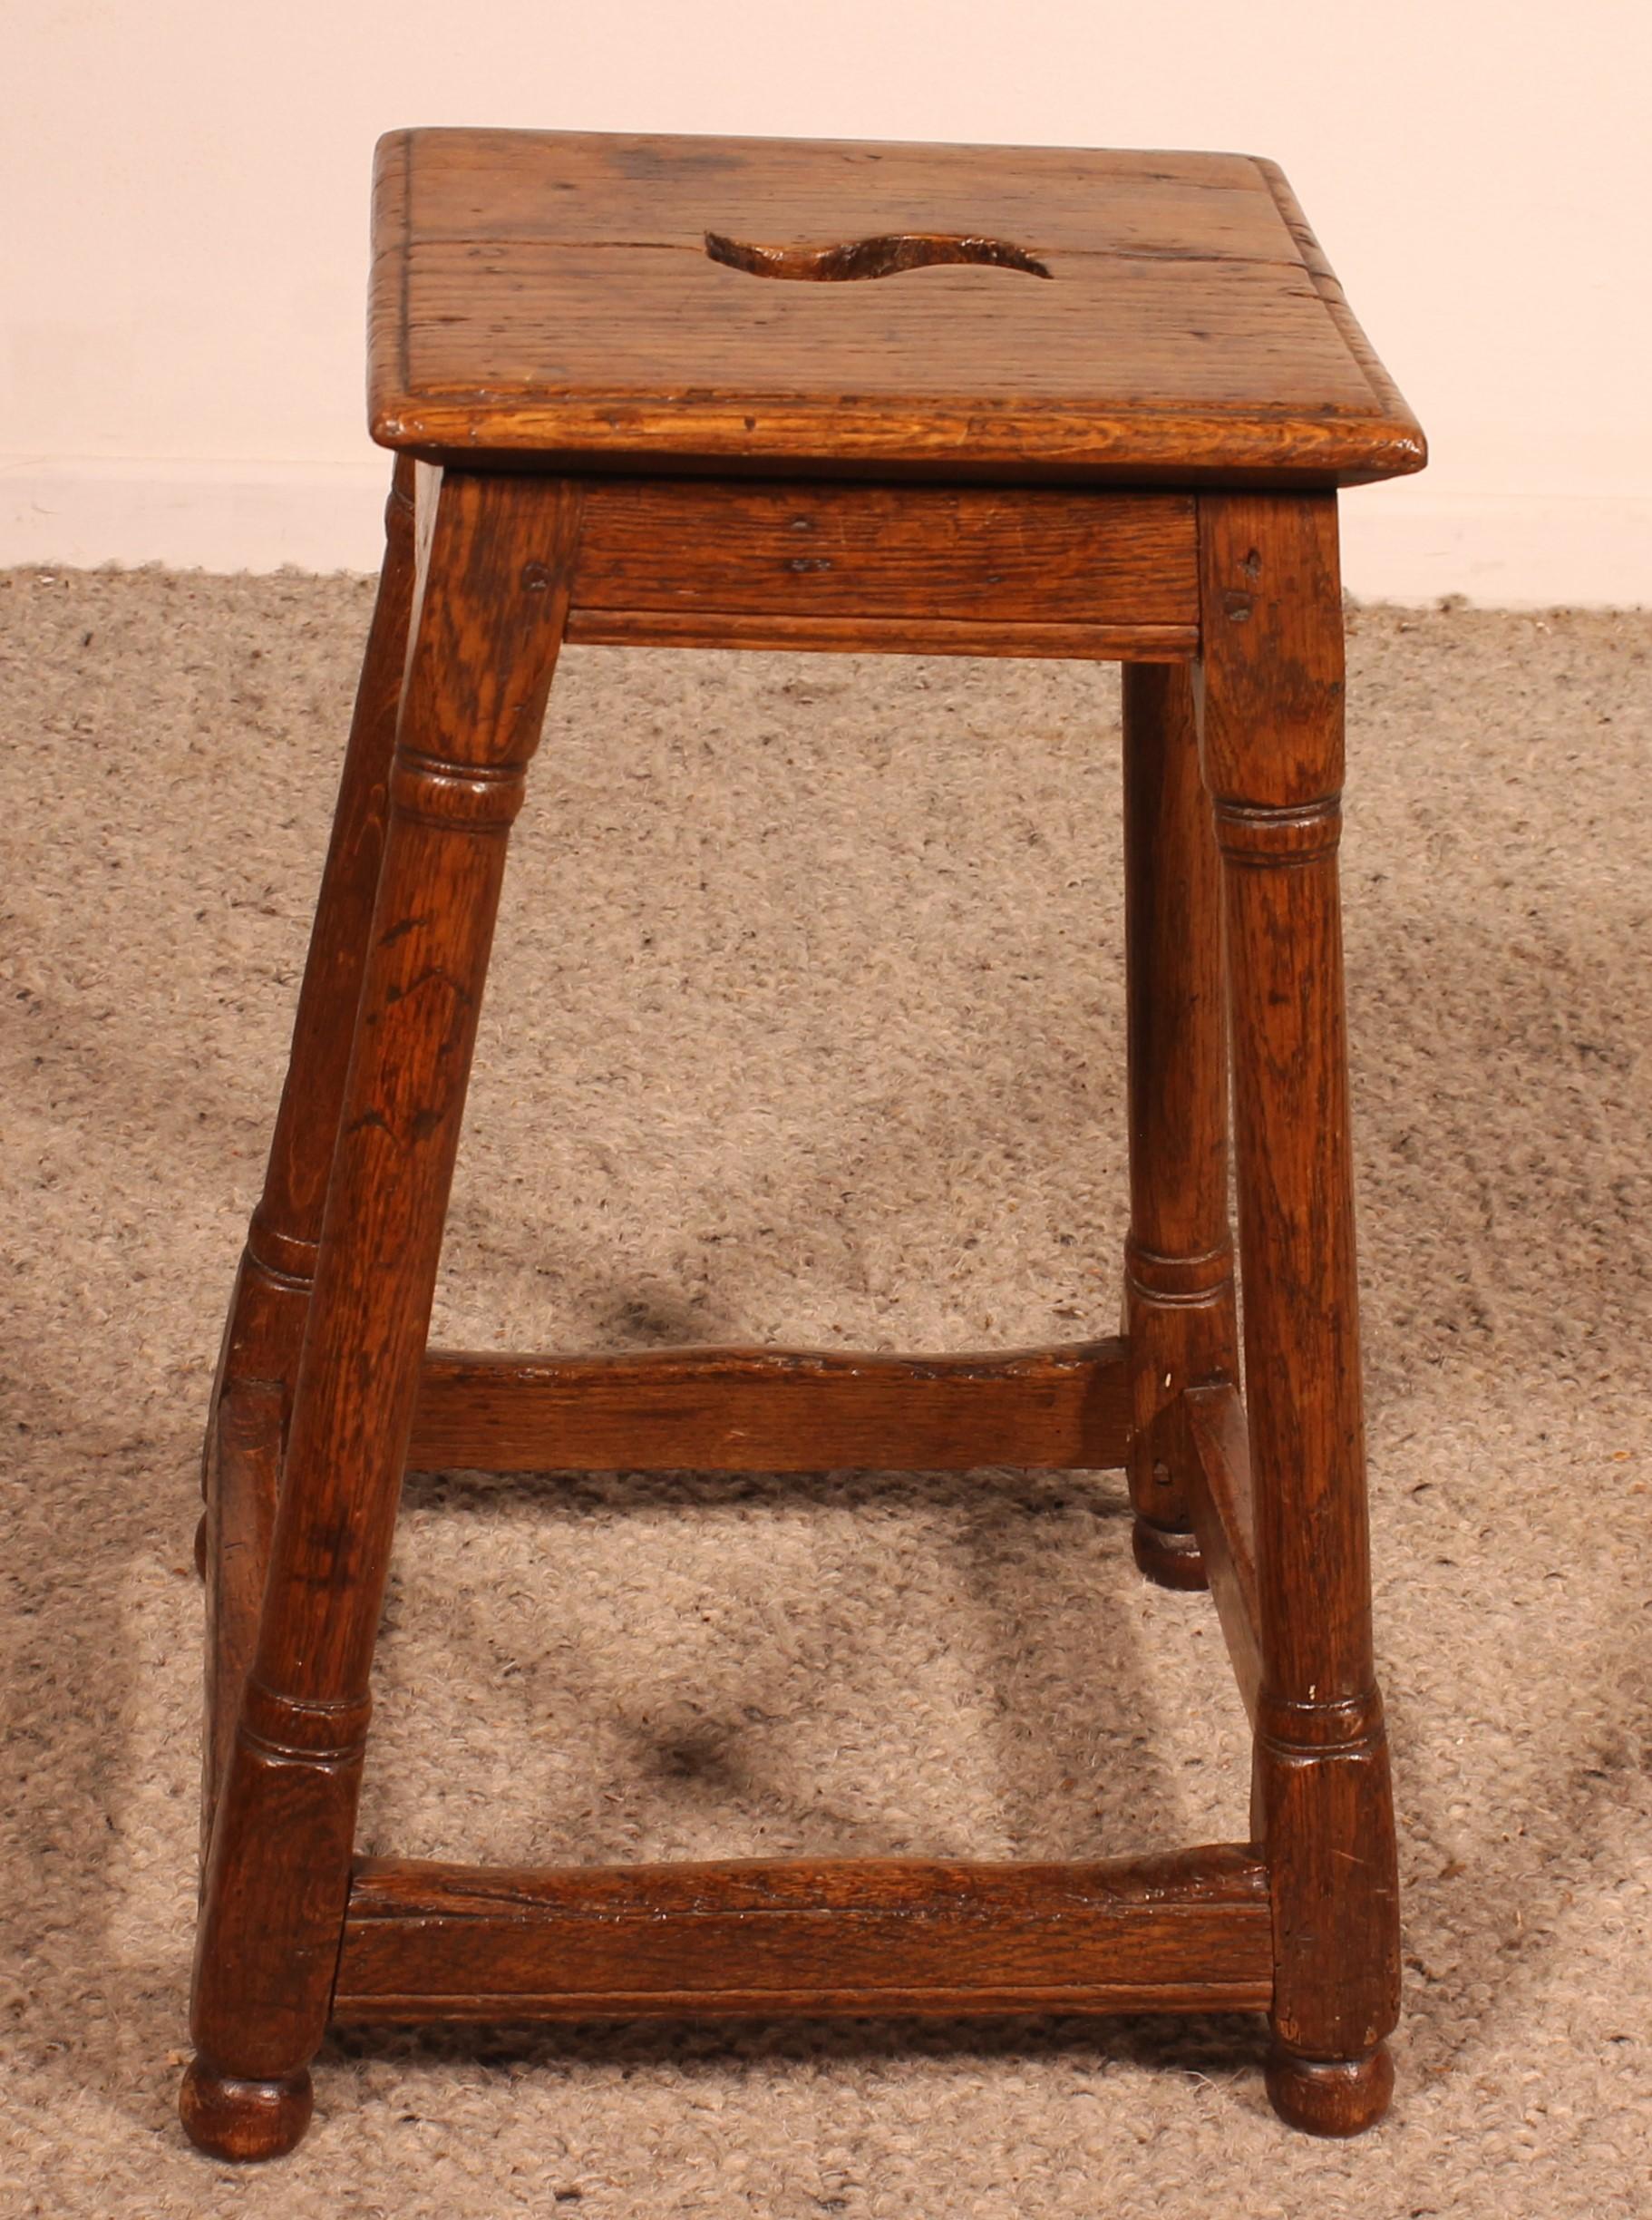 lovely stool from the 18th century from England
Beautiful small model with a very beautiful column base connected by a spacer and ending with ball feet

Beautiful original top (often replaced) with a beautiful patina and a small corbin